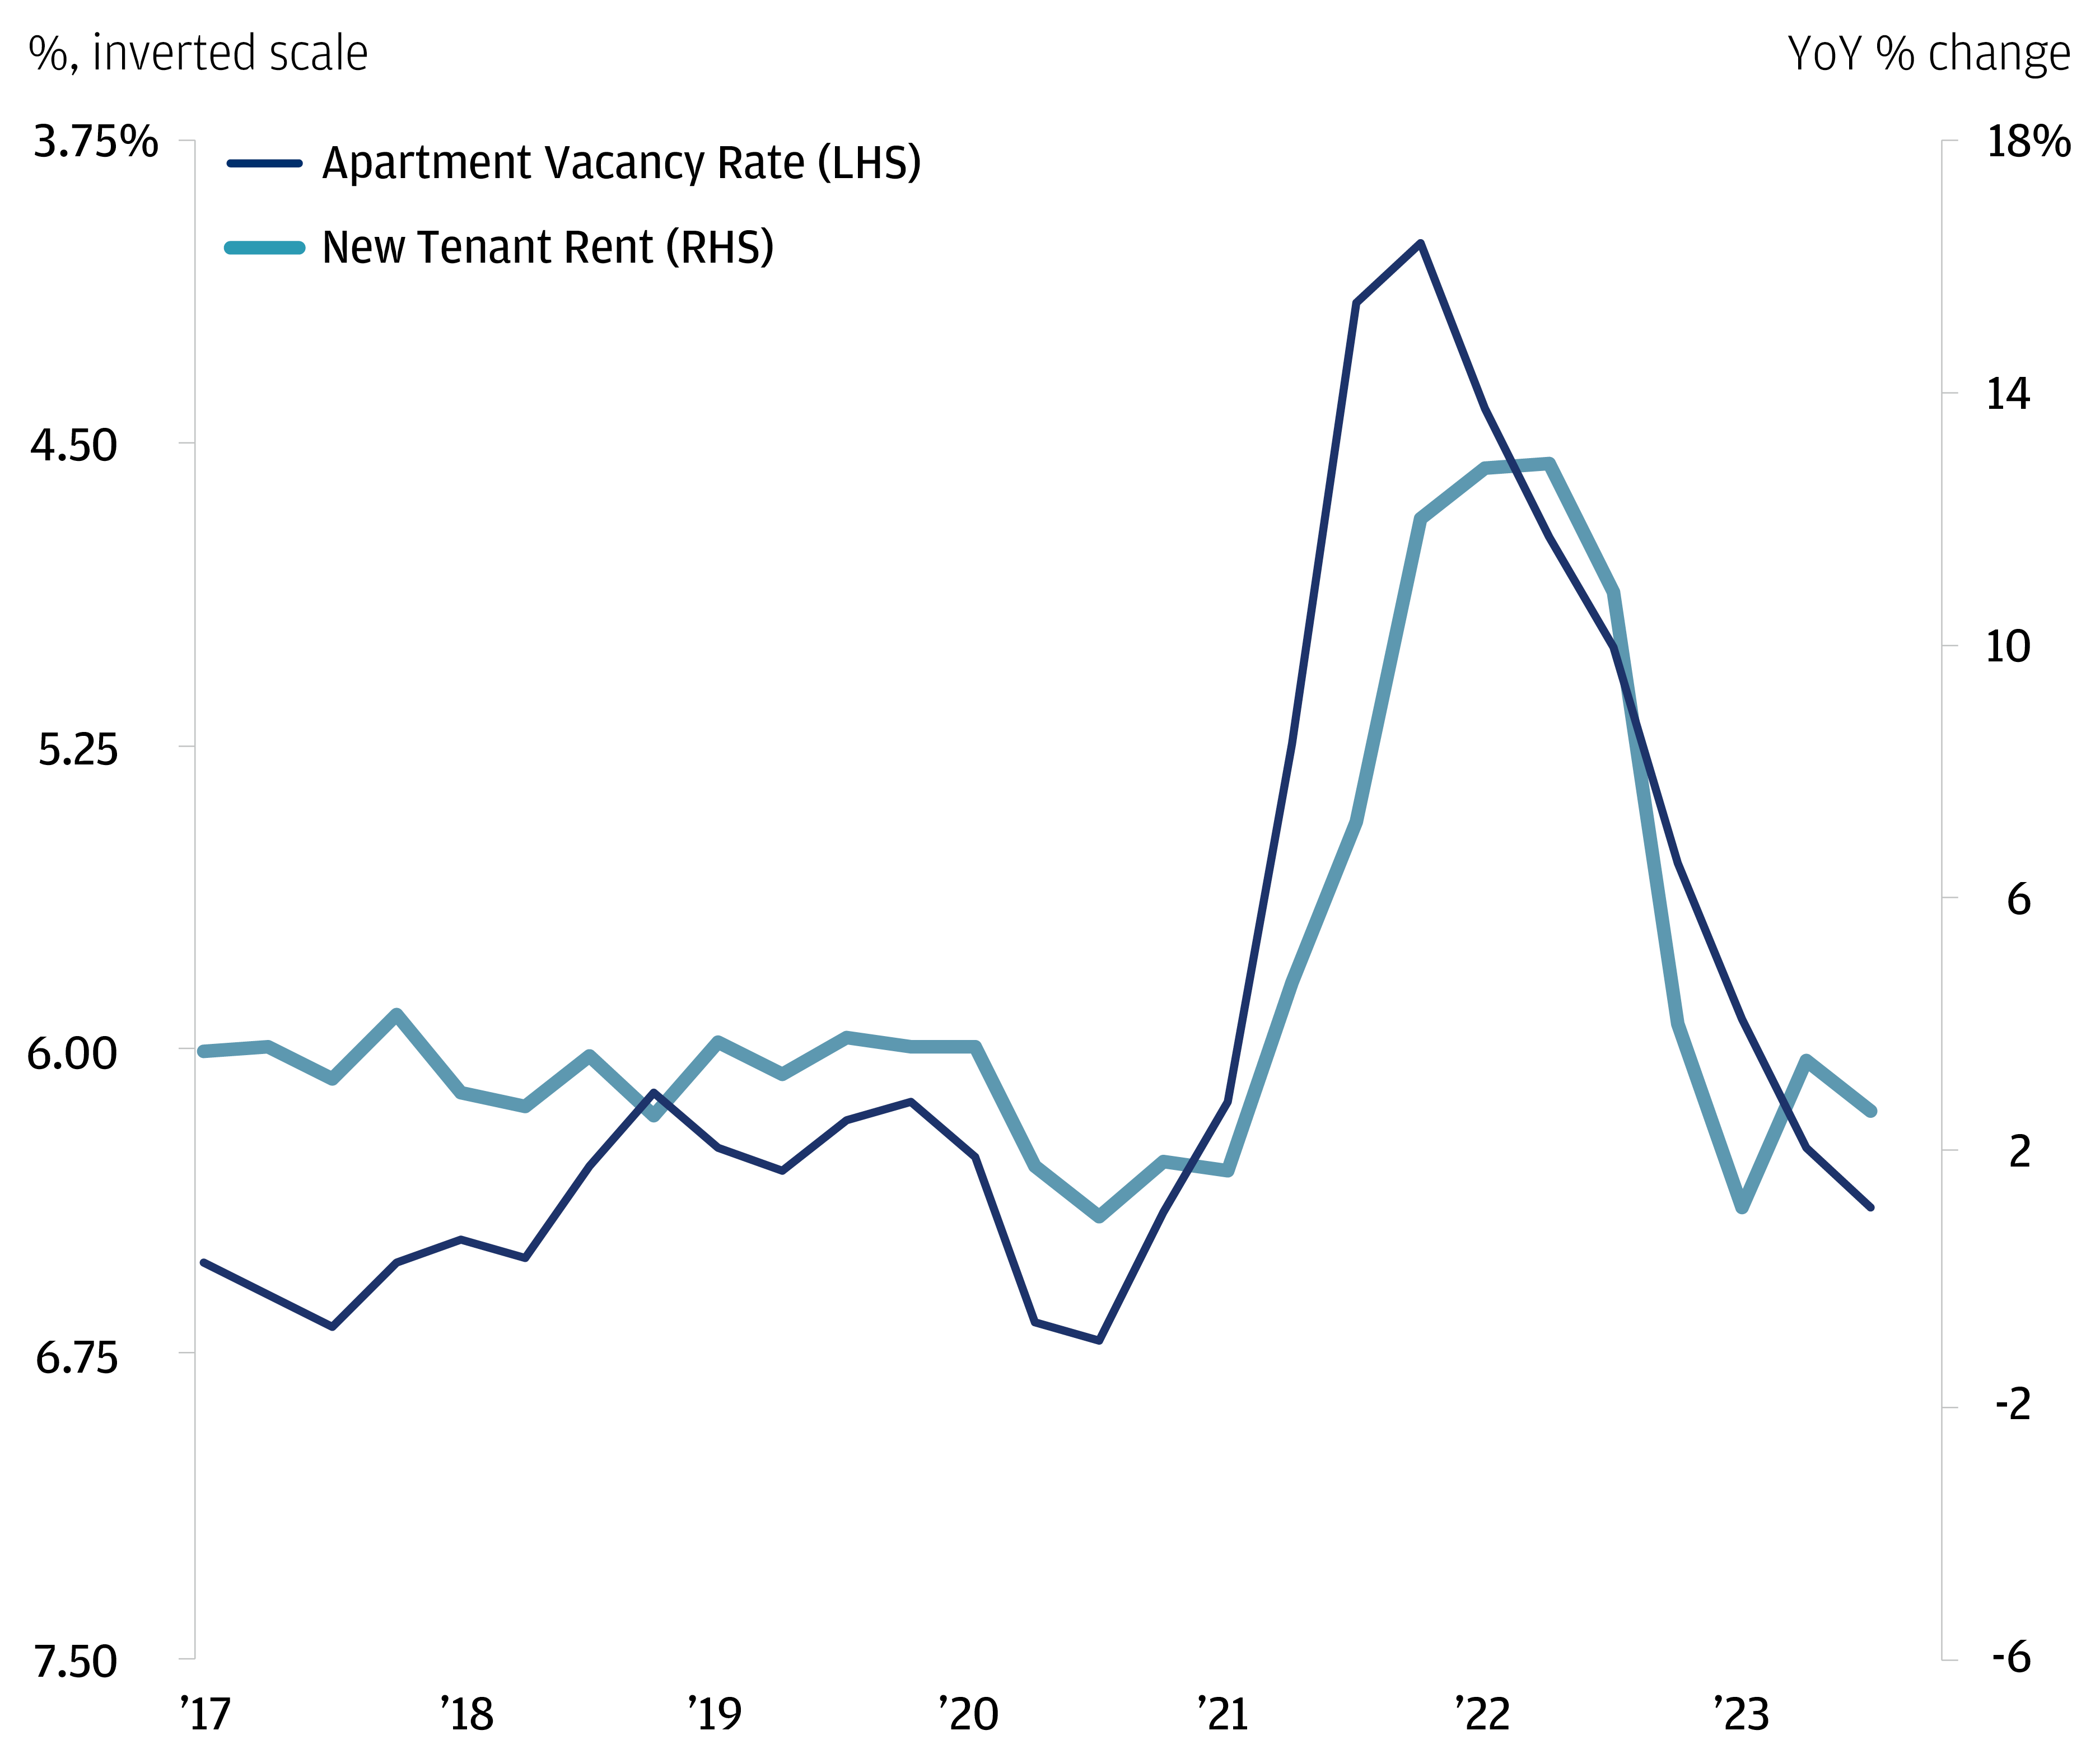 The chart describes apartment vacancy rate % and new tenant rent in terms of year-over-year % change.